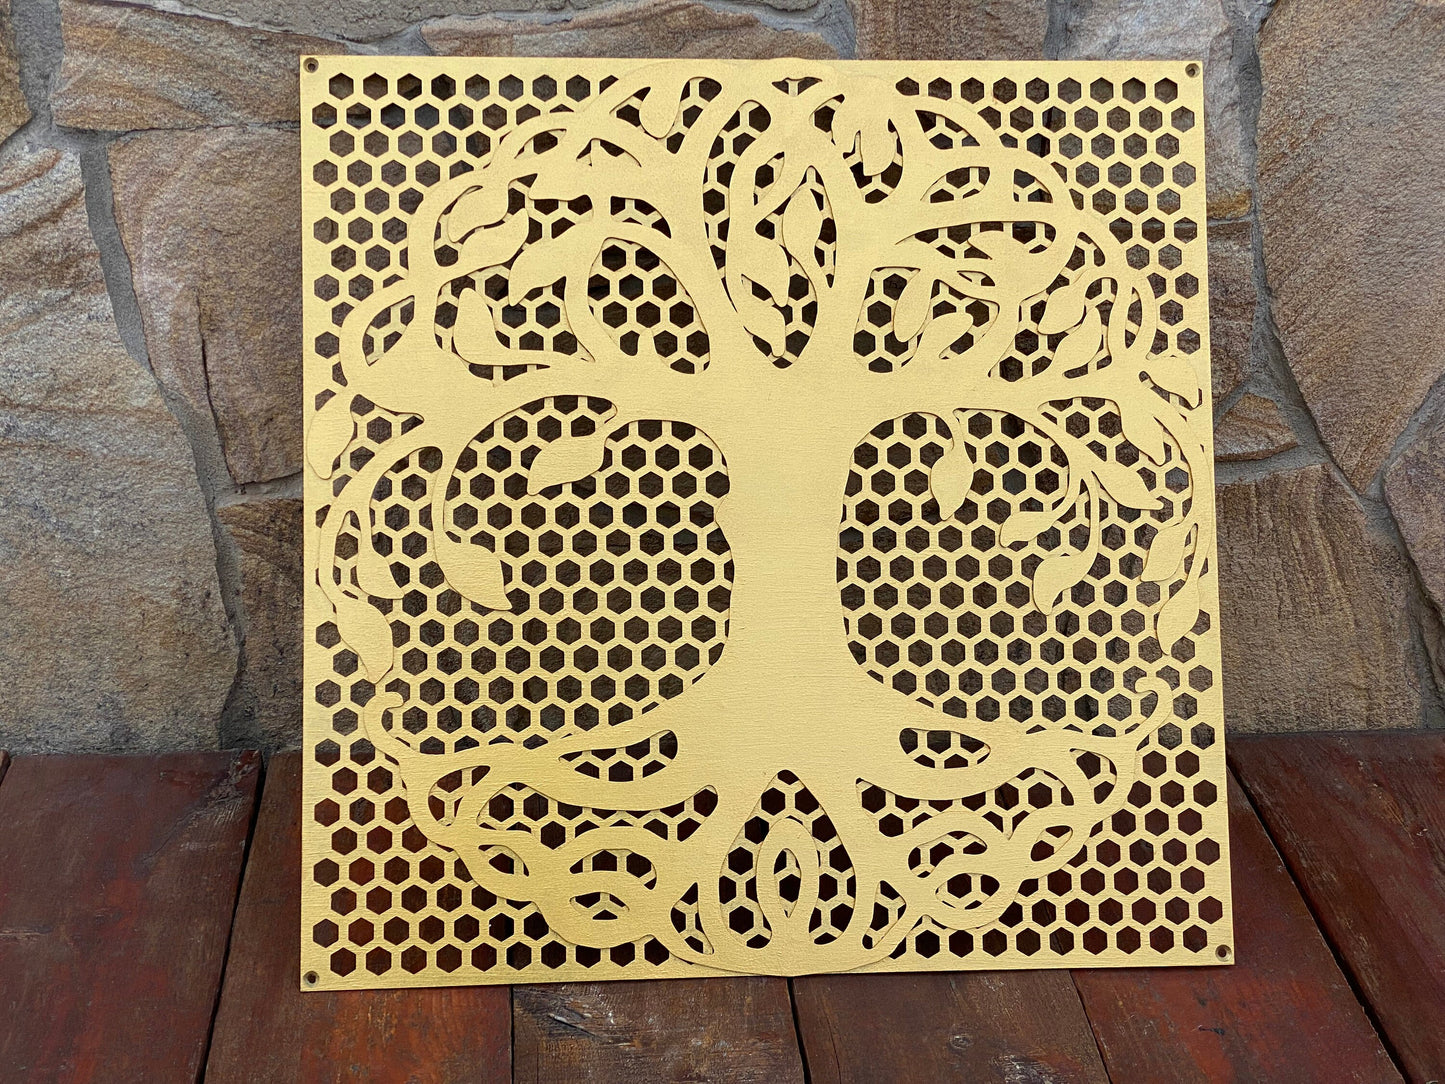 Vent cover, tree of life, grate, grid, cabinet door panel,air return grille,wall divider, anniversary,Celtic,medieval,air return grate cover